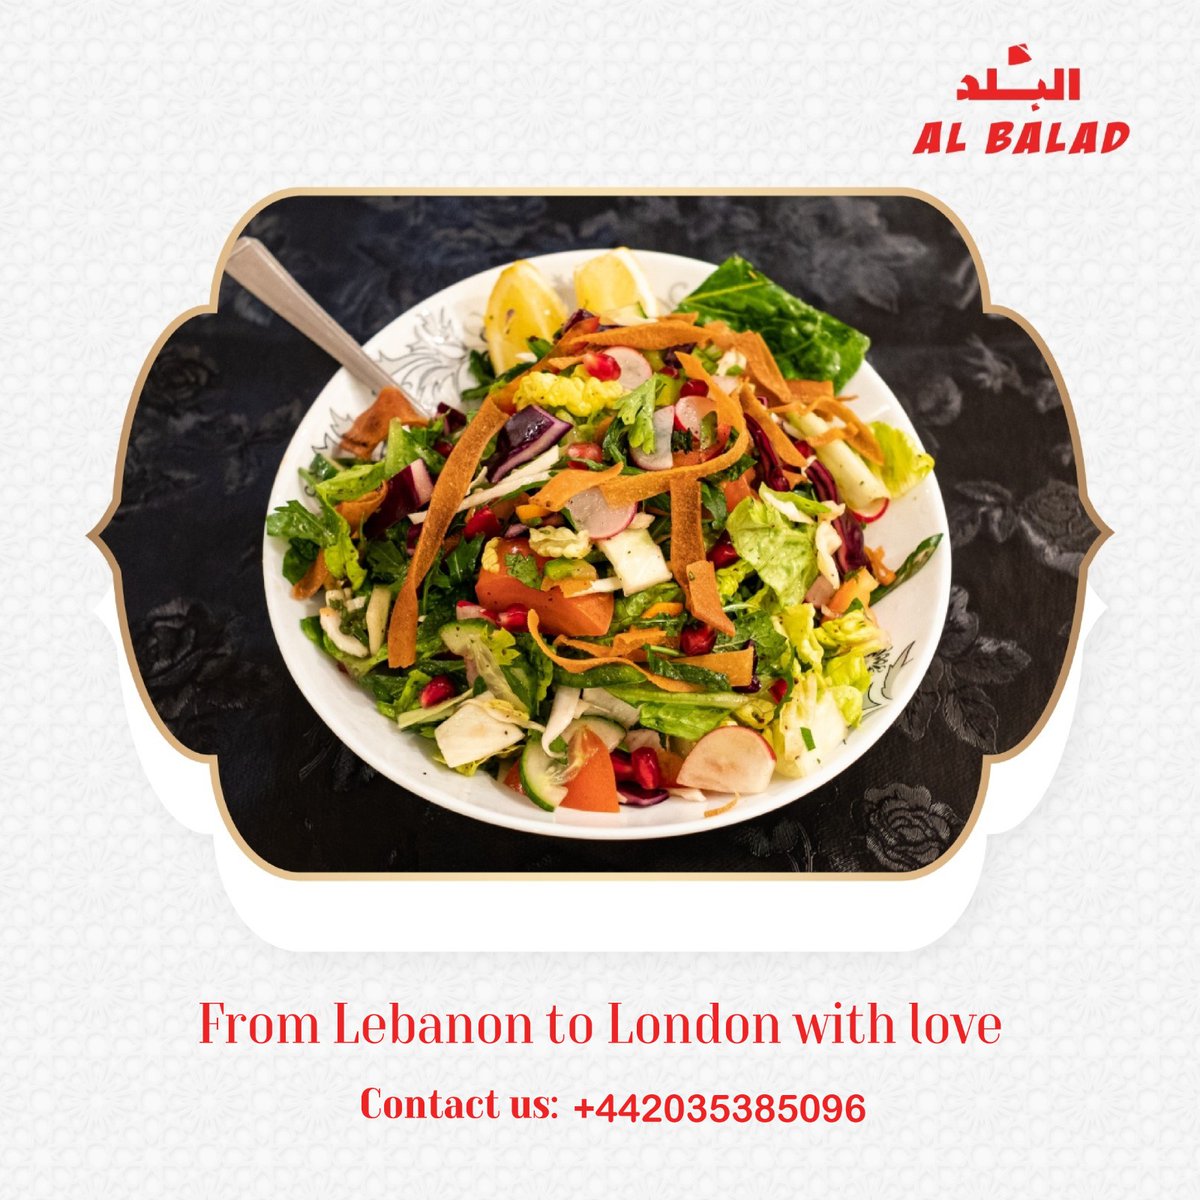 Fattoush salad is a Lebanese signature🇱🇧🥗 Made with a healthy mix of seasonal vegetables and topped with the iconic fried pita bread😋❤️ it’s the perfect lunchtime salad. Come and try the Lebanese taste❤️. 📌Free delivery 'From Lebanon to London with love'❤️ #lebaneserestaurant